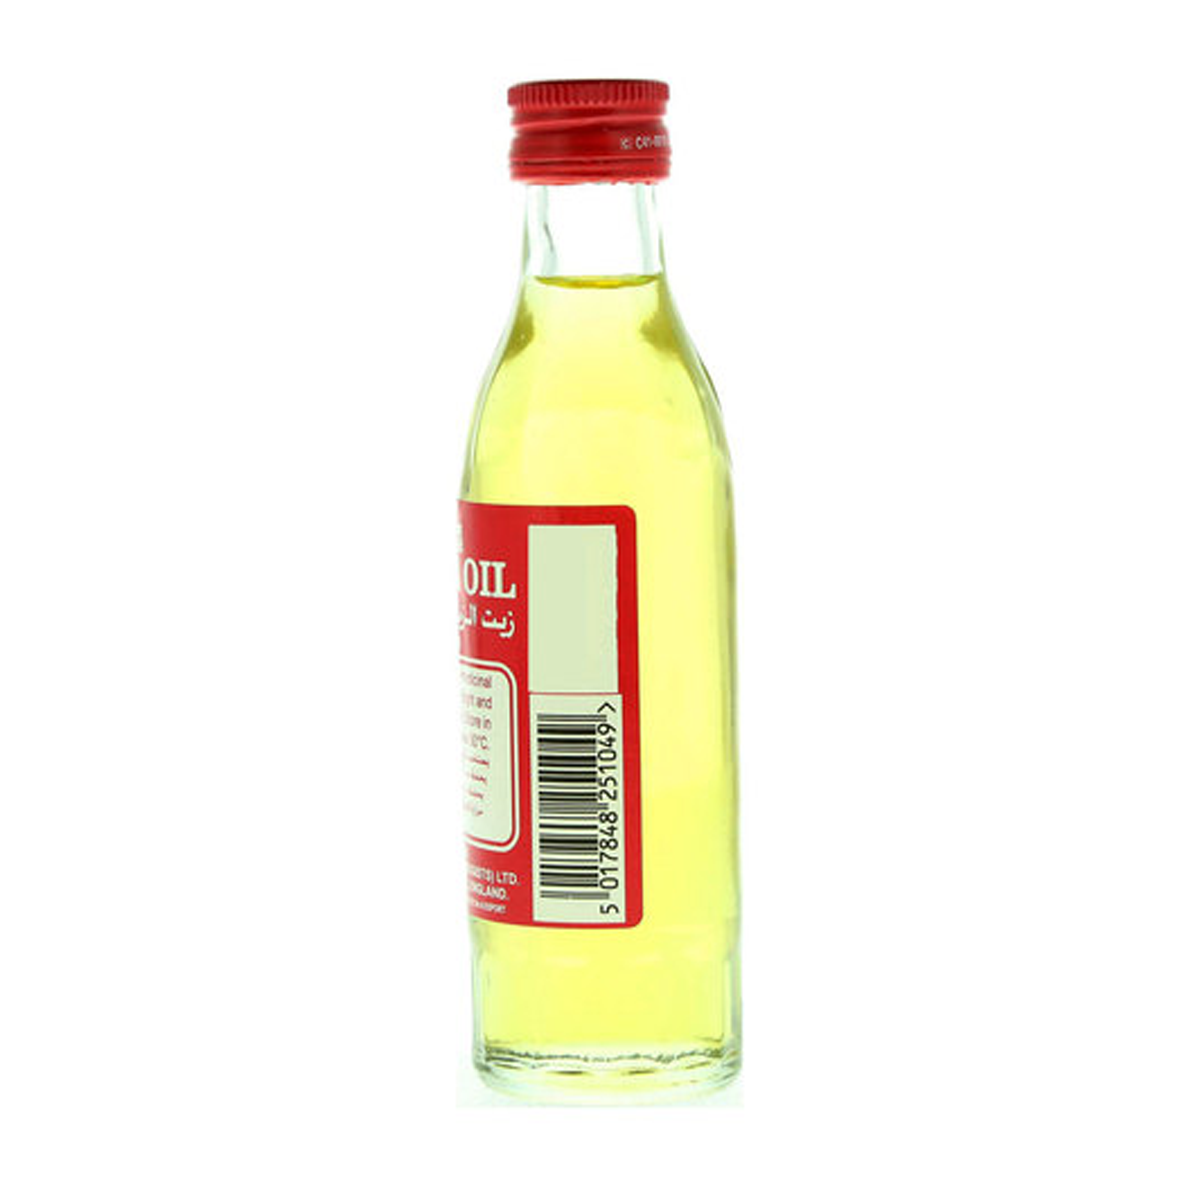 Bell's Healthcare Olive Oil B.P. 70ml Clear